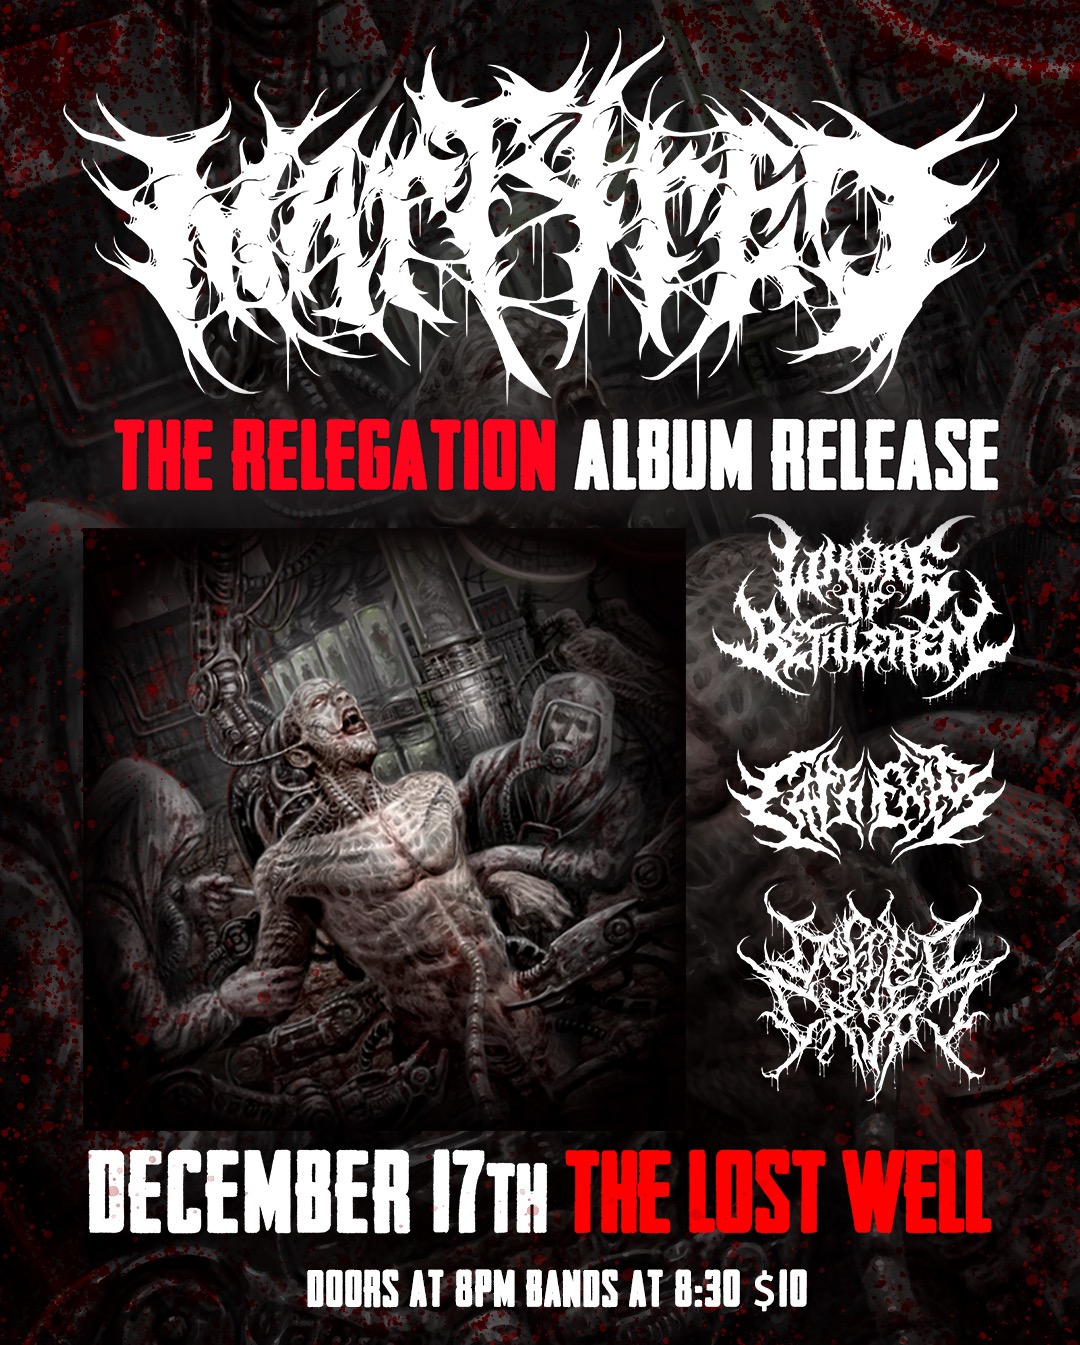 Martyred ( record release), Whore of Bethlehem, Cathexis, Defiled Crypt